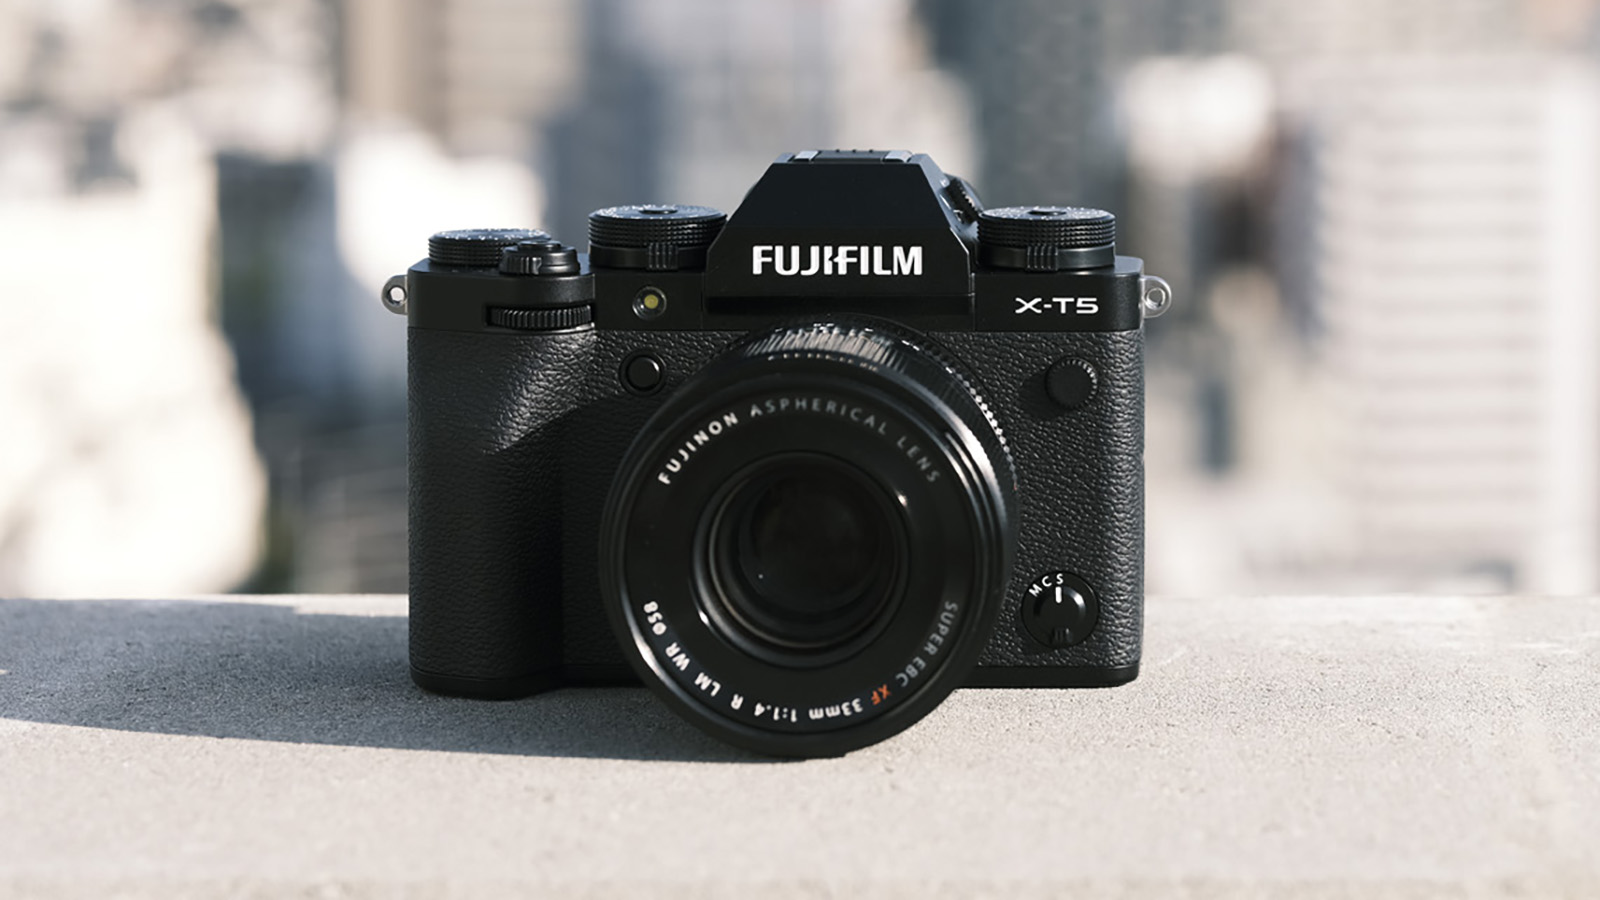 The Fujifilm X-T5 camera leaning against a wall